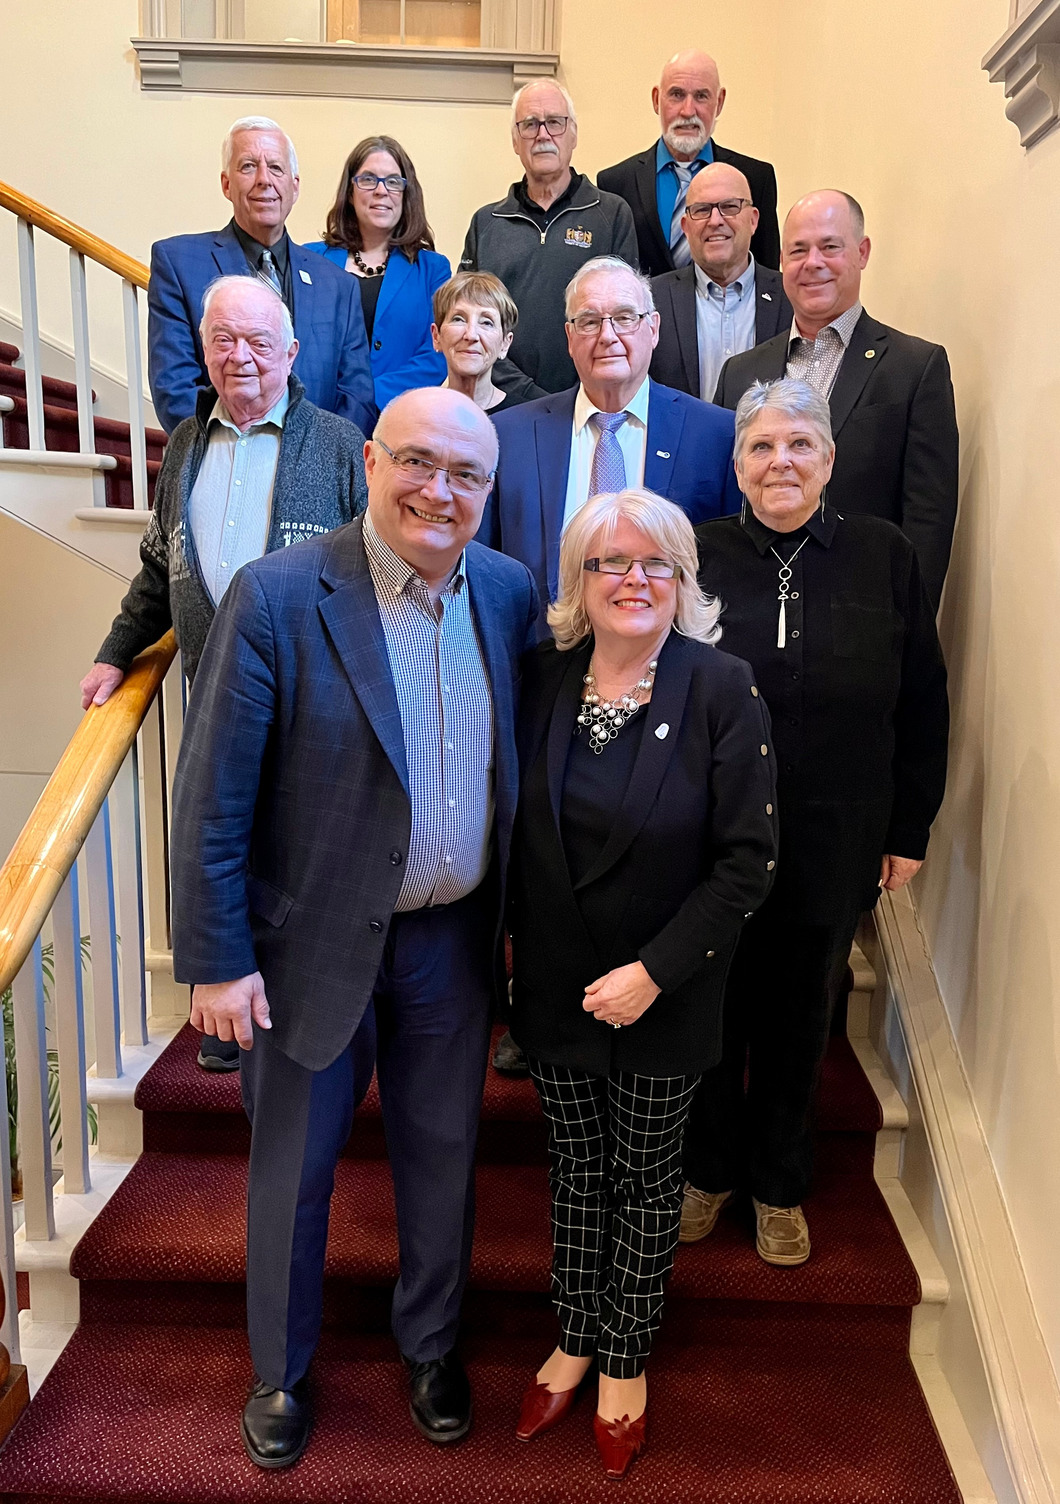 EOWC group March 2023